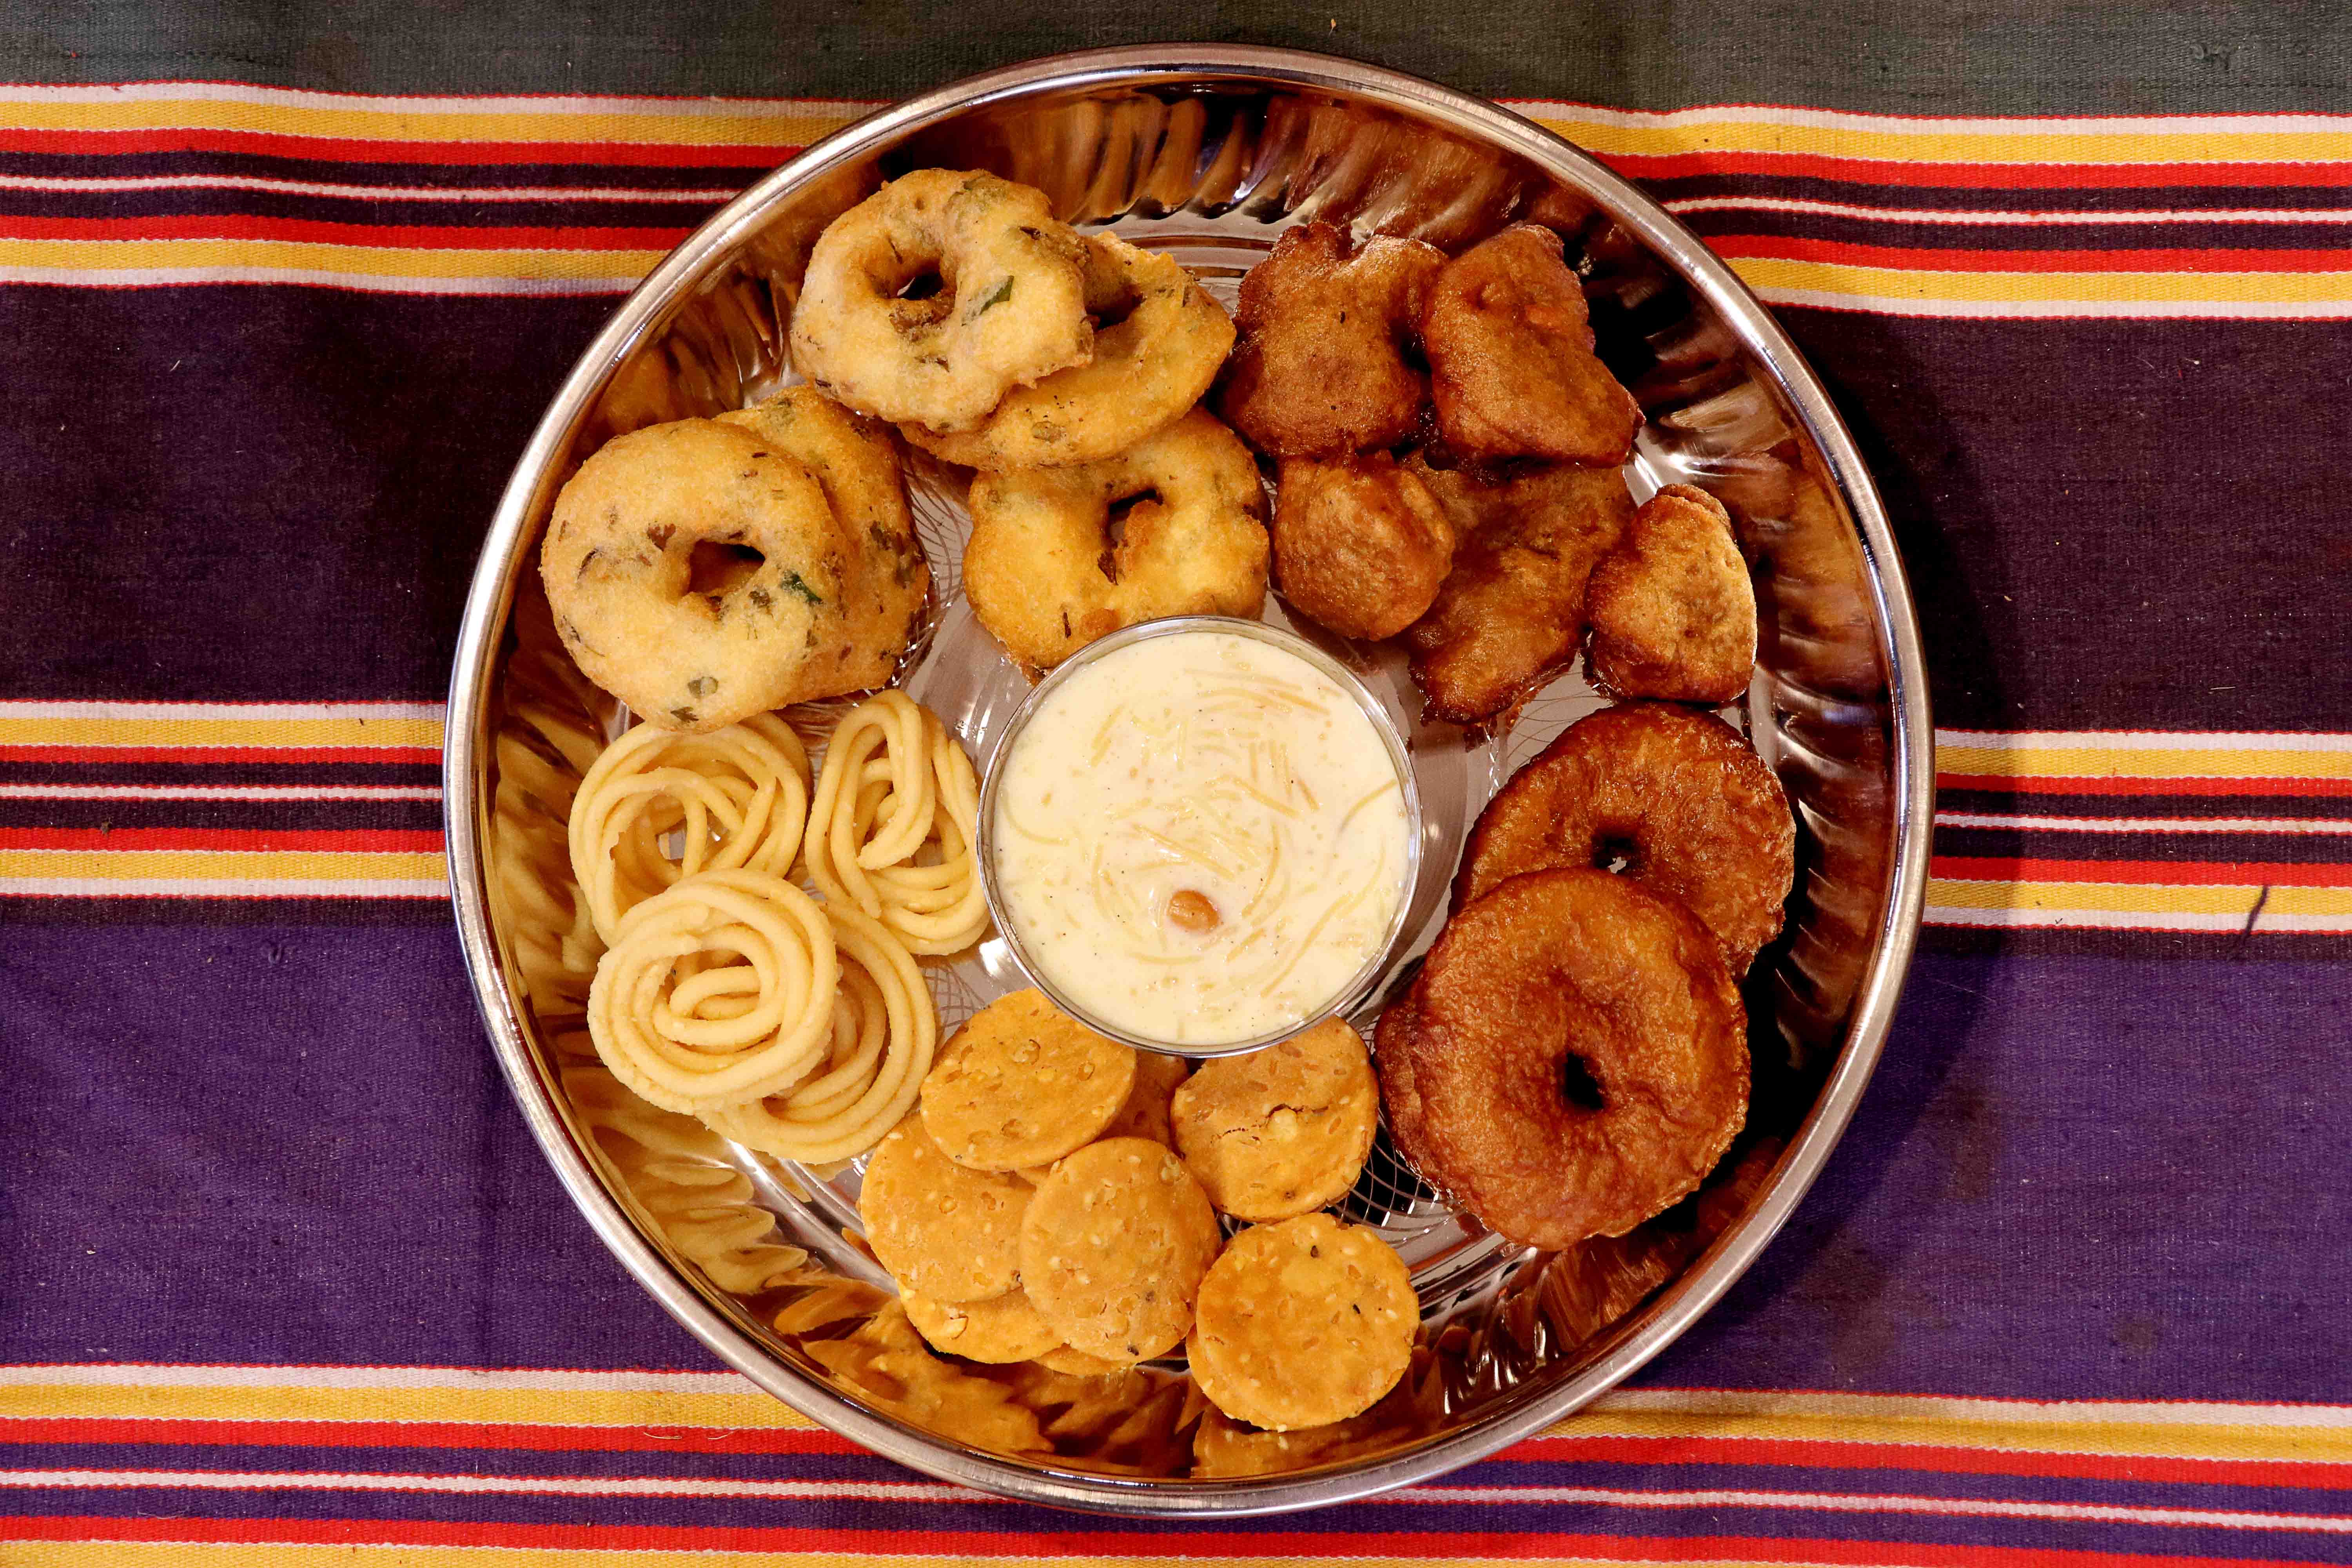 sweets and savories like payasam, vada arranged on a plate for offering to Hindu gods